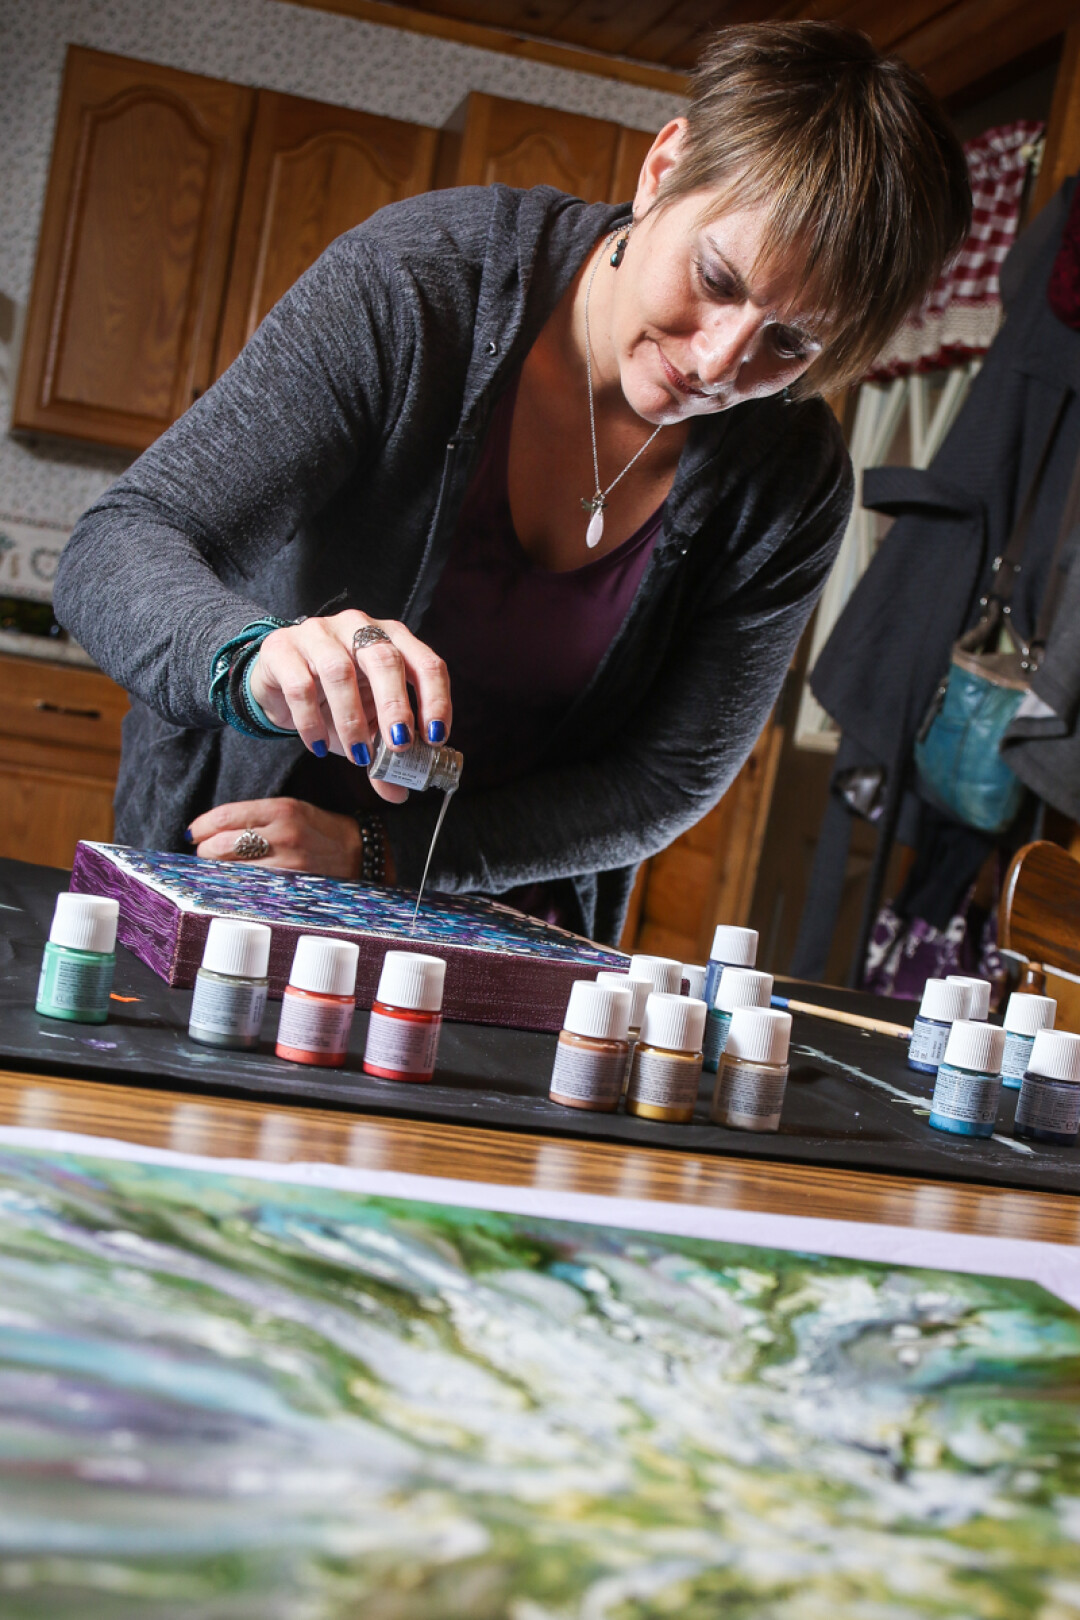 LET THE SPIRIT MOVE YOU. Artist Tanya Meyer creates one-of-a-kind art by pouring paint.